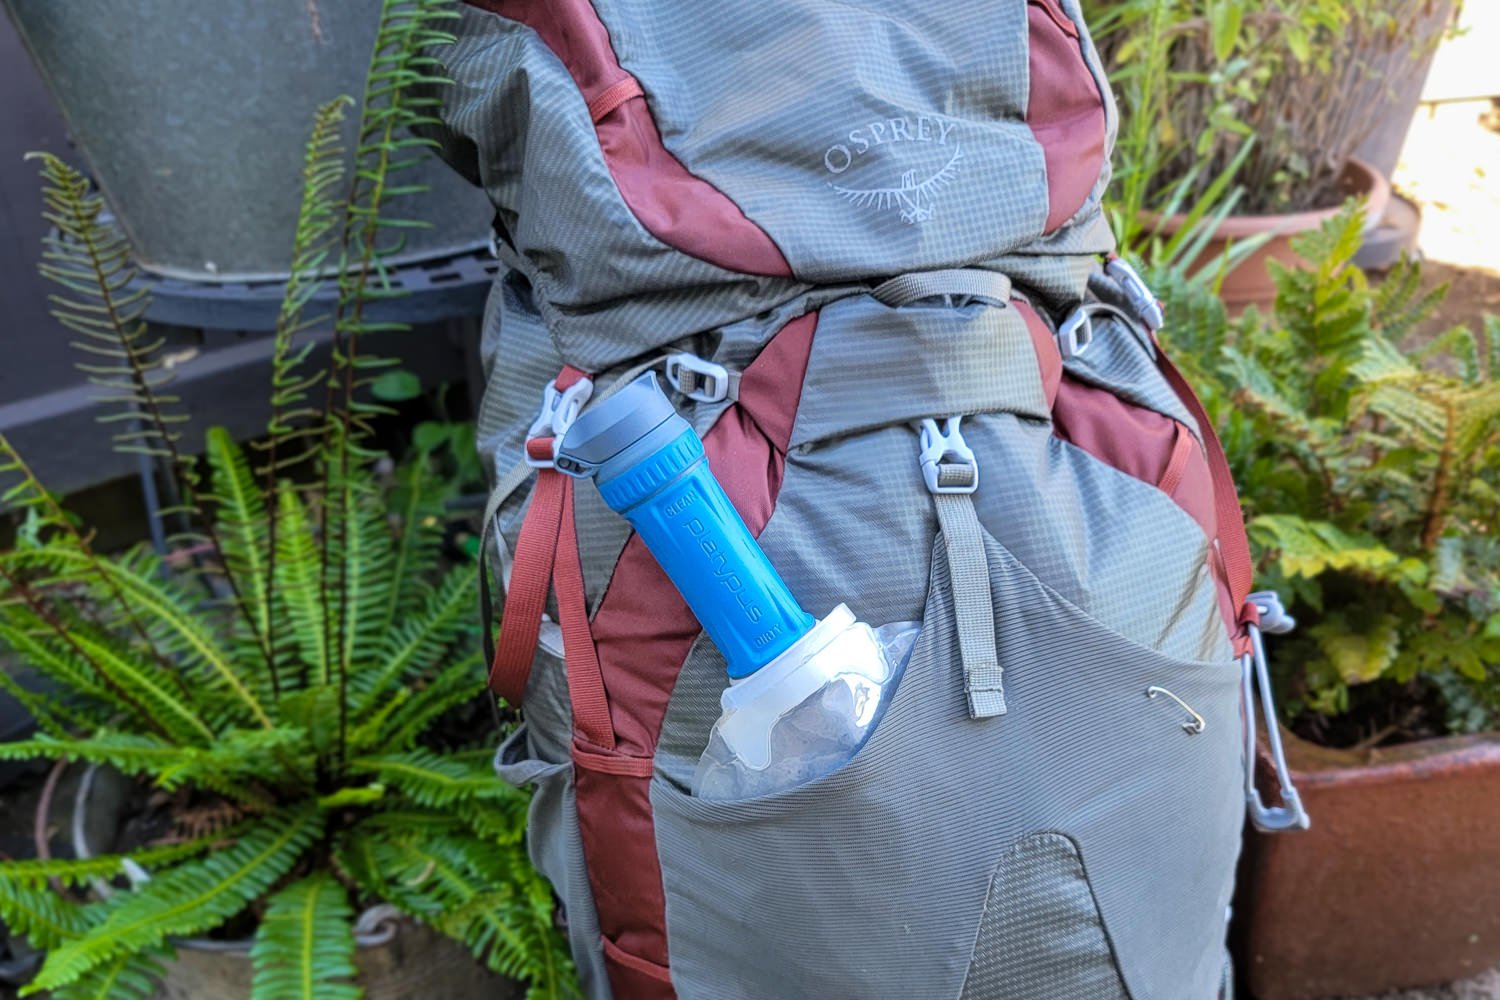 The Platypus QuickDraw in the mesh pocket on the Osprey Eja backpacking pack